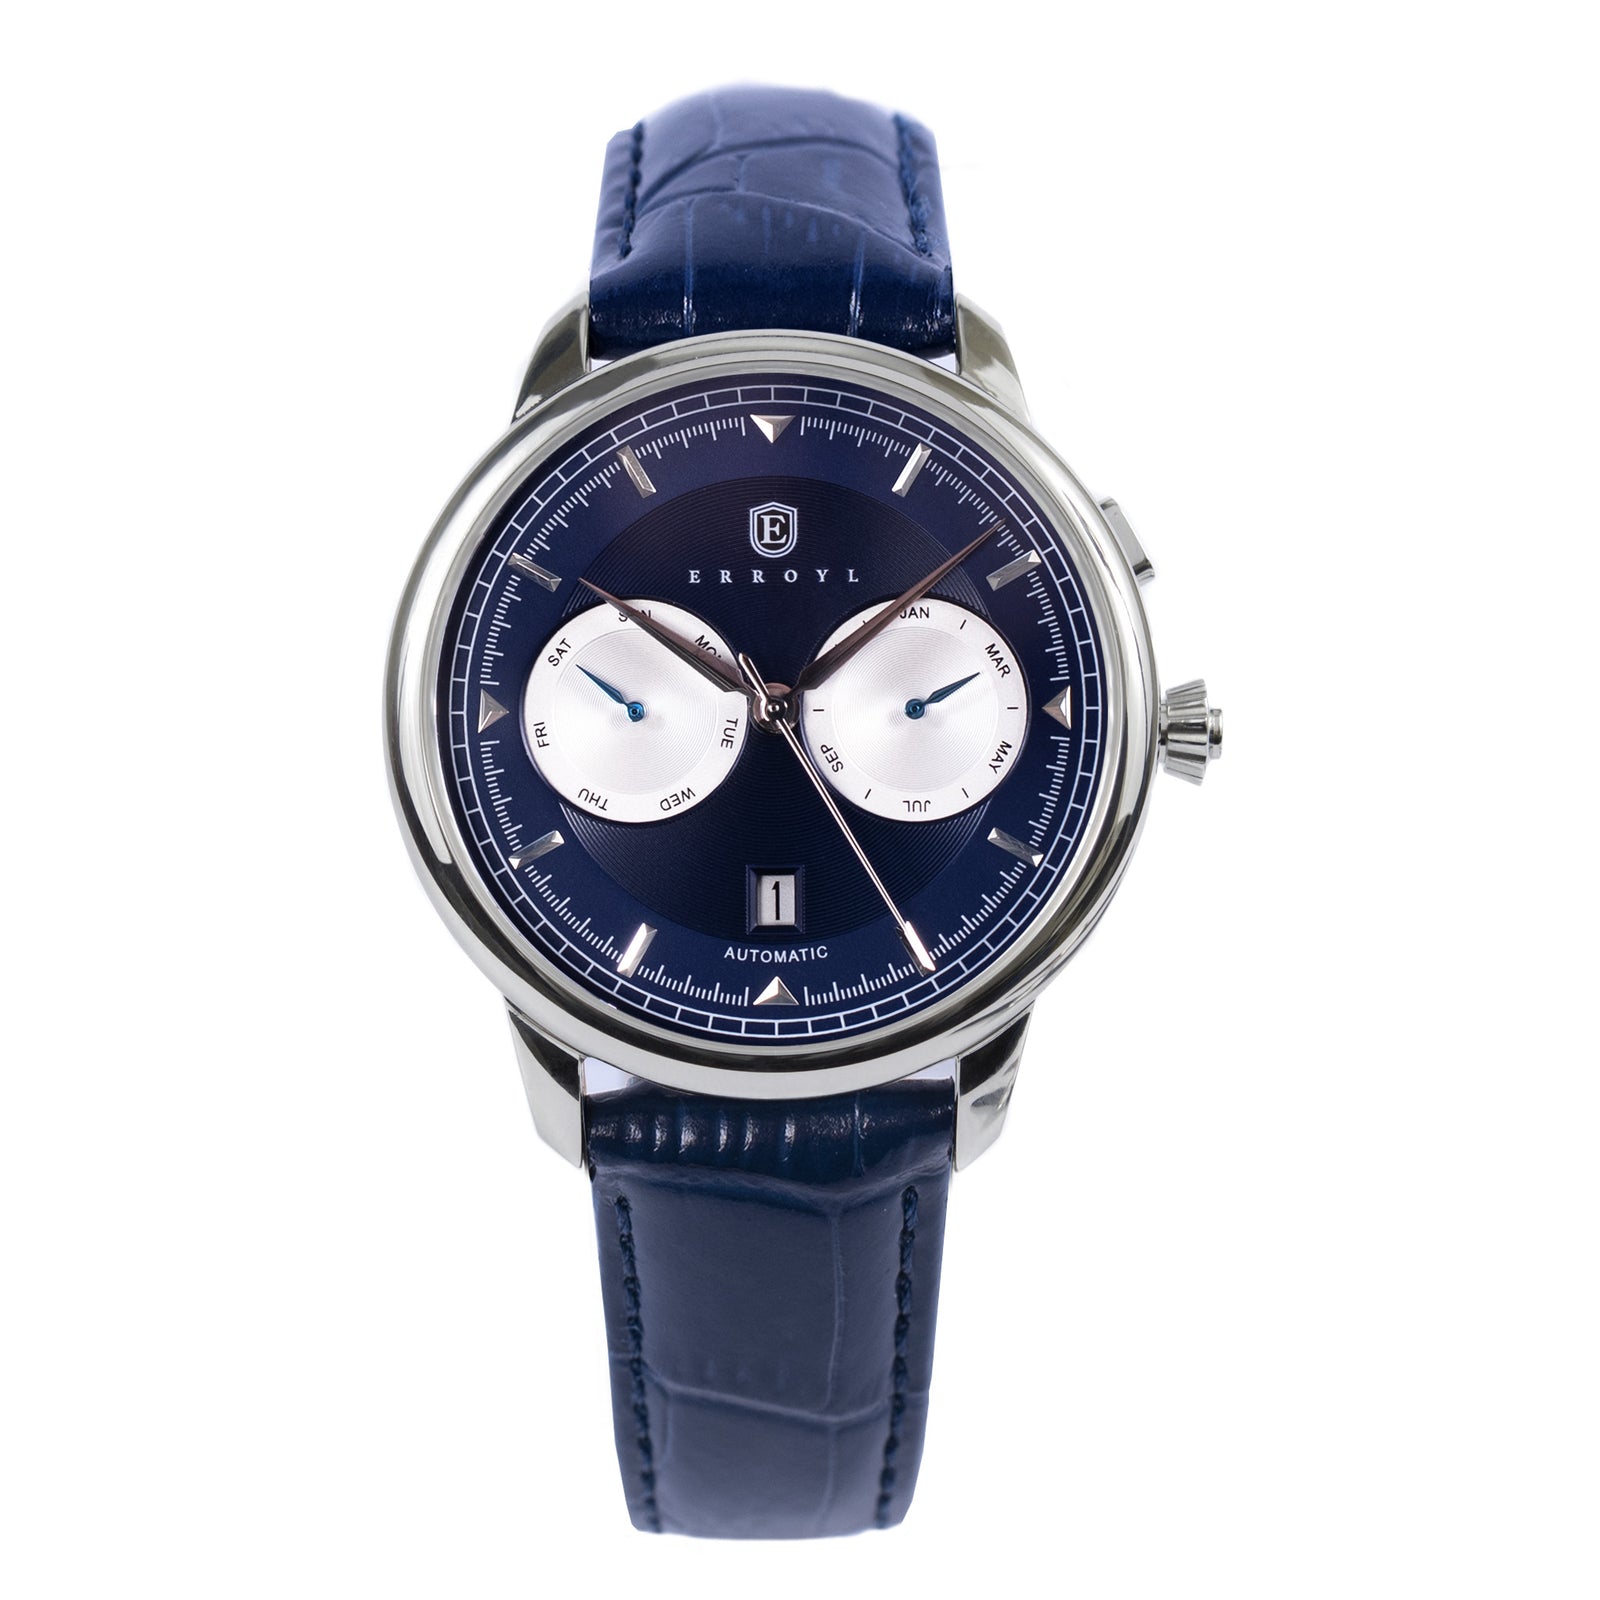 Mechanical Watches For Men, the Regent - Collection ERROYL